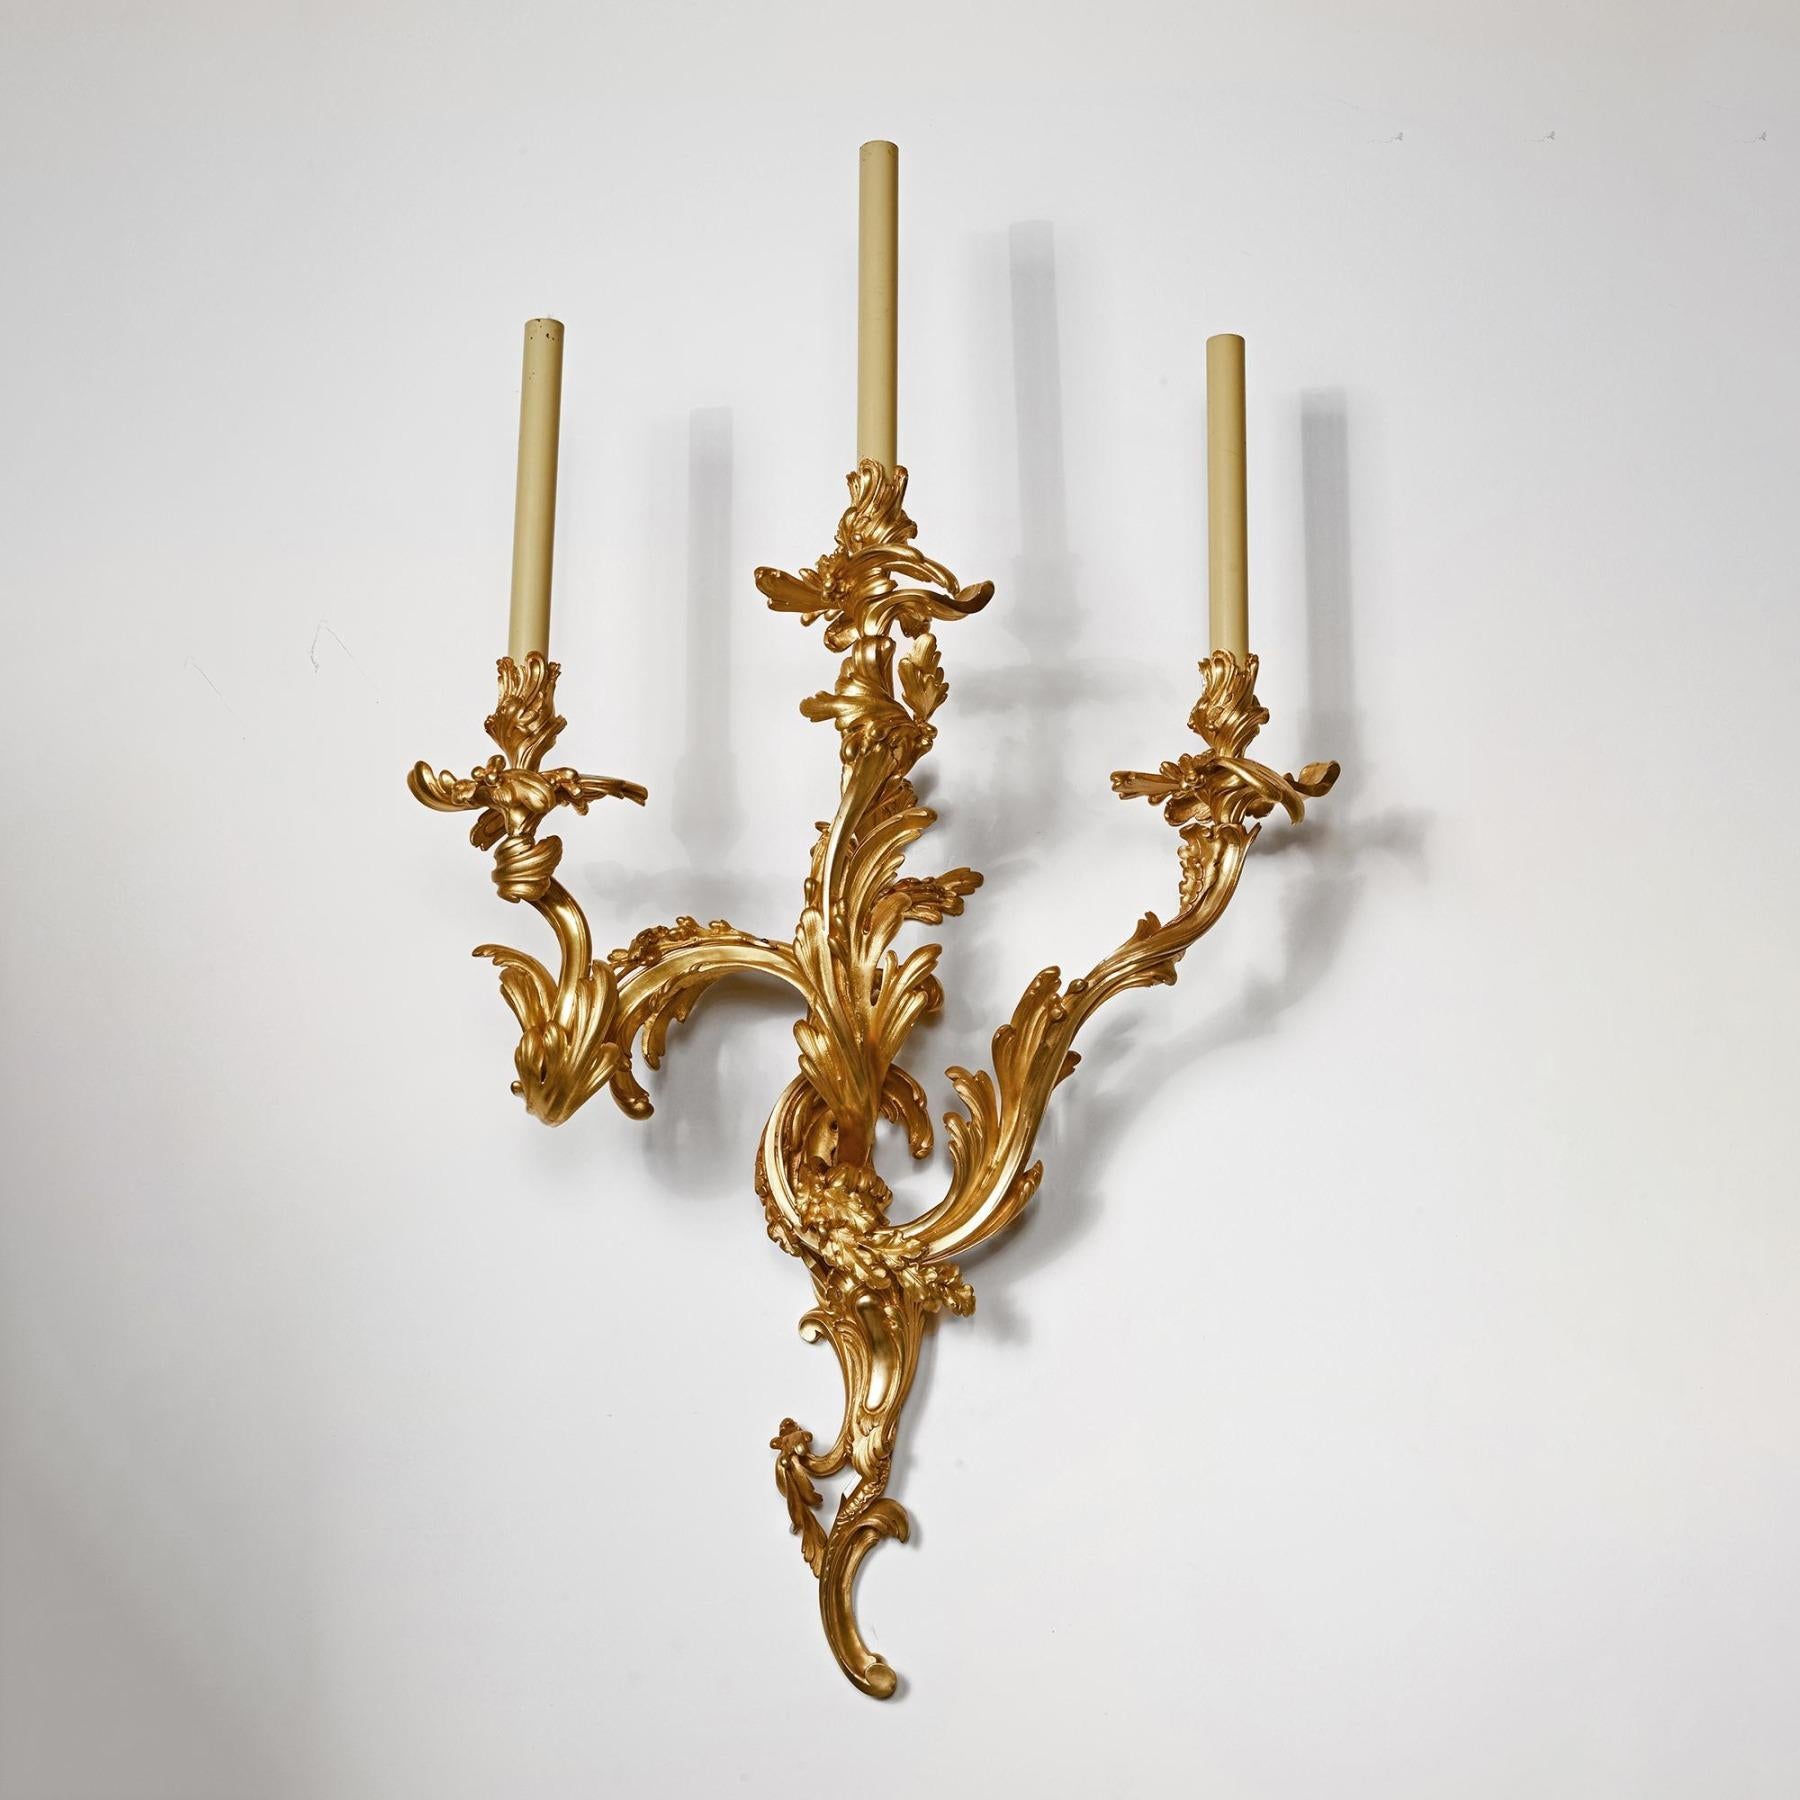 An exceptional pair of grand scale 19th century French gilt bronze wall lights after the Rococo Model by Jean-Claude Duplessis of c.1749.

French - Paris Circa 1880
 
These outstanding wall lights of wonderful scale and colour with asymmetric